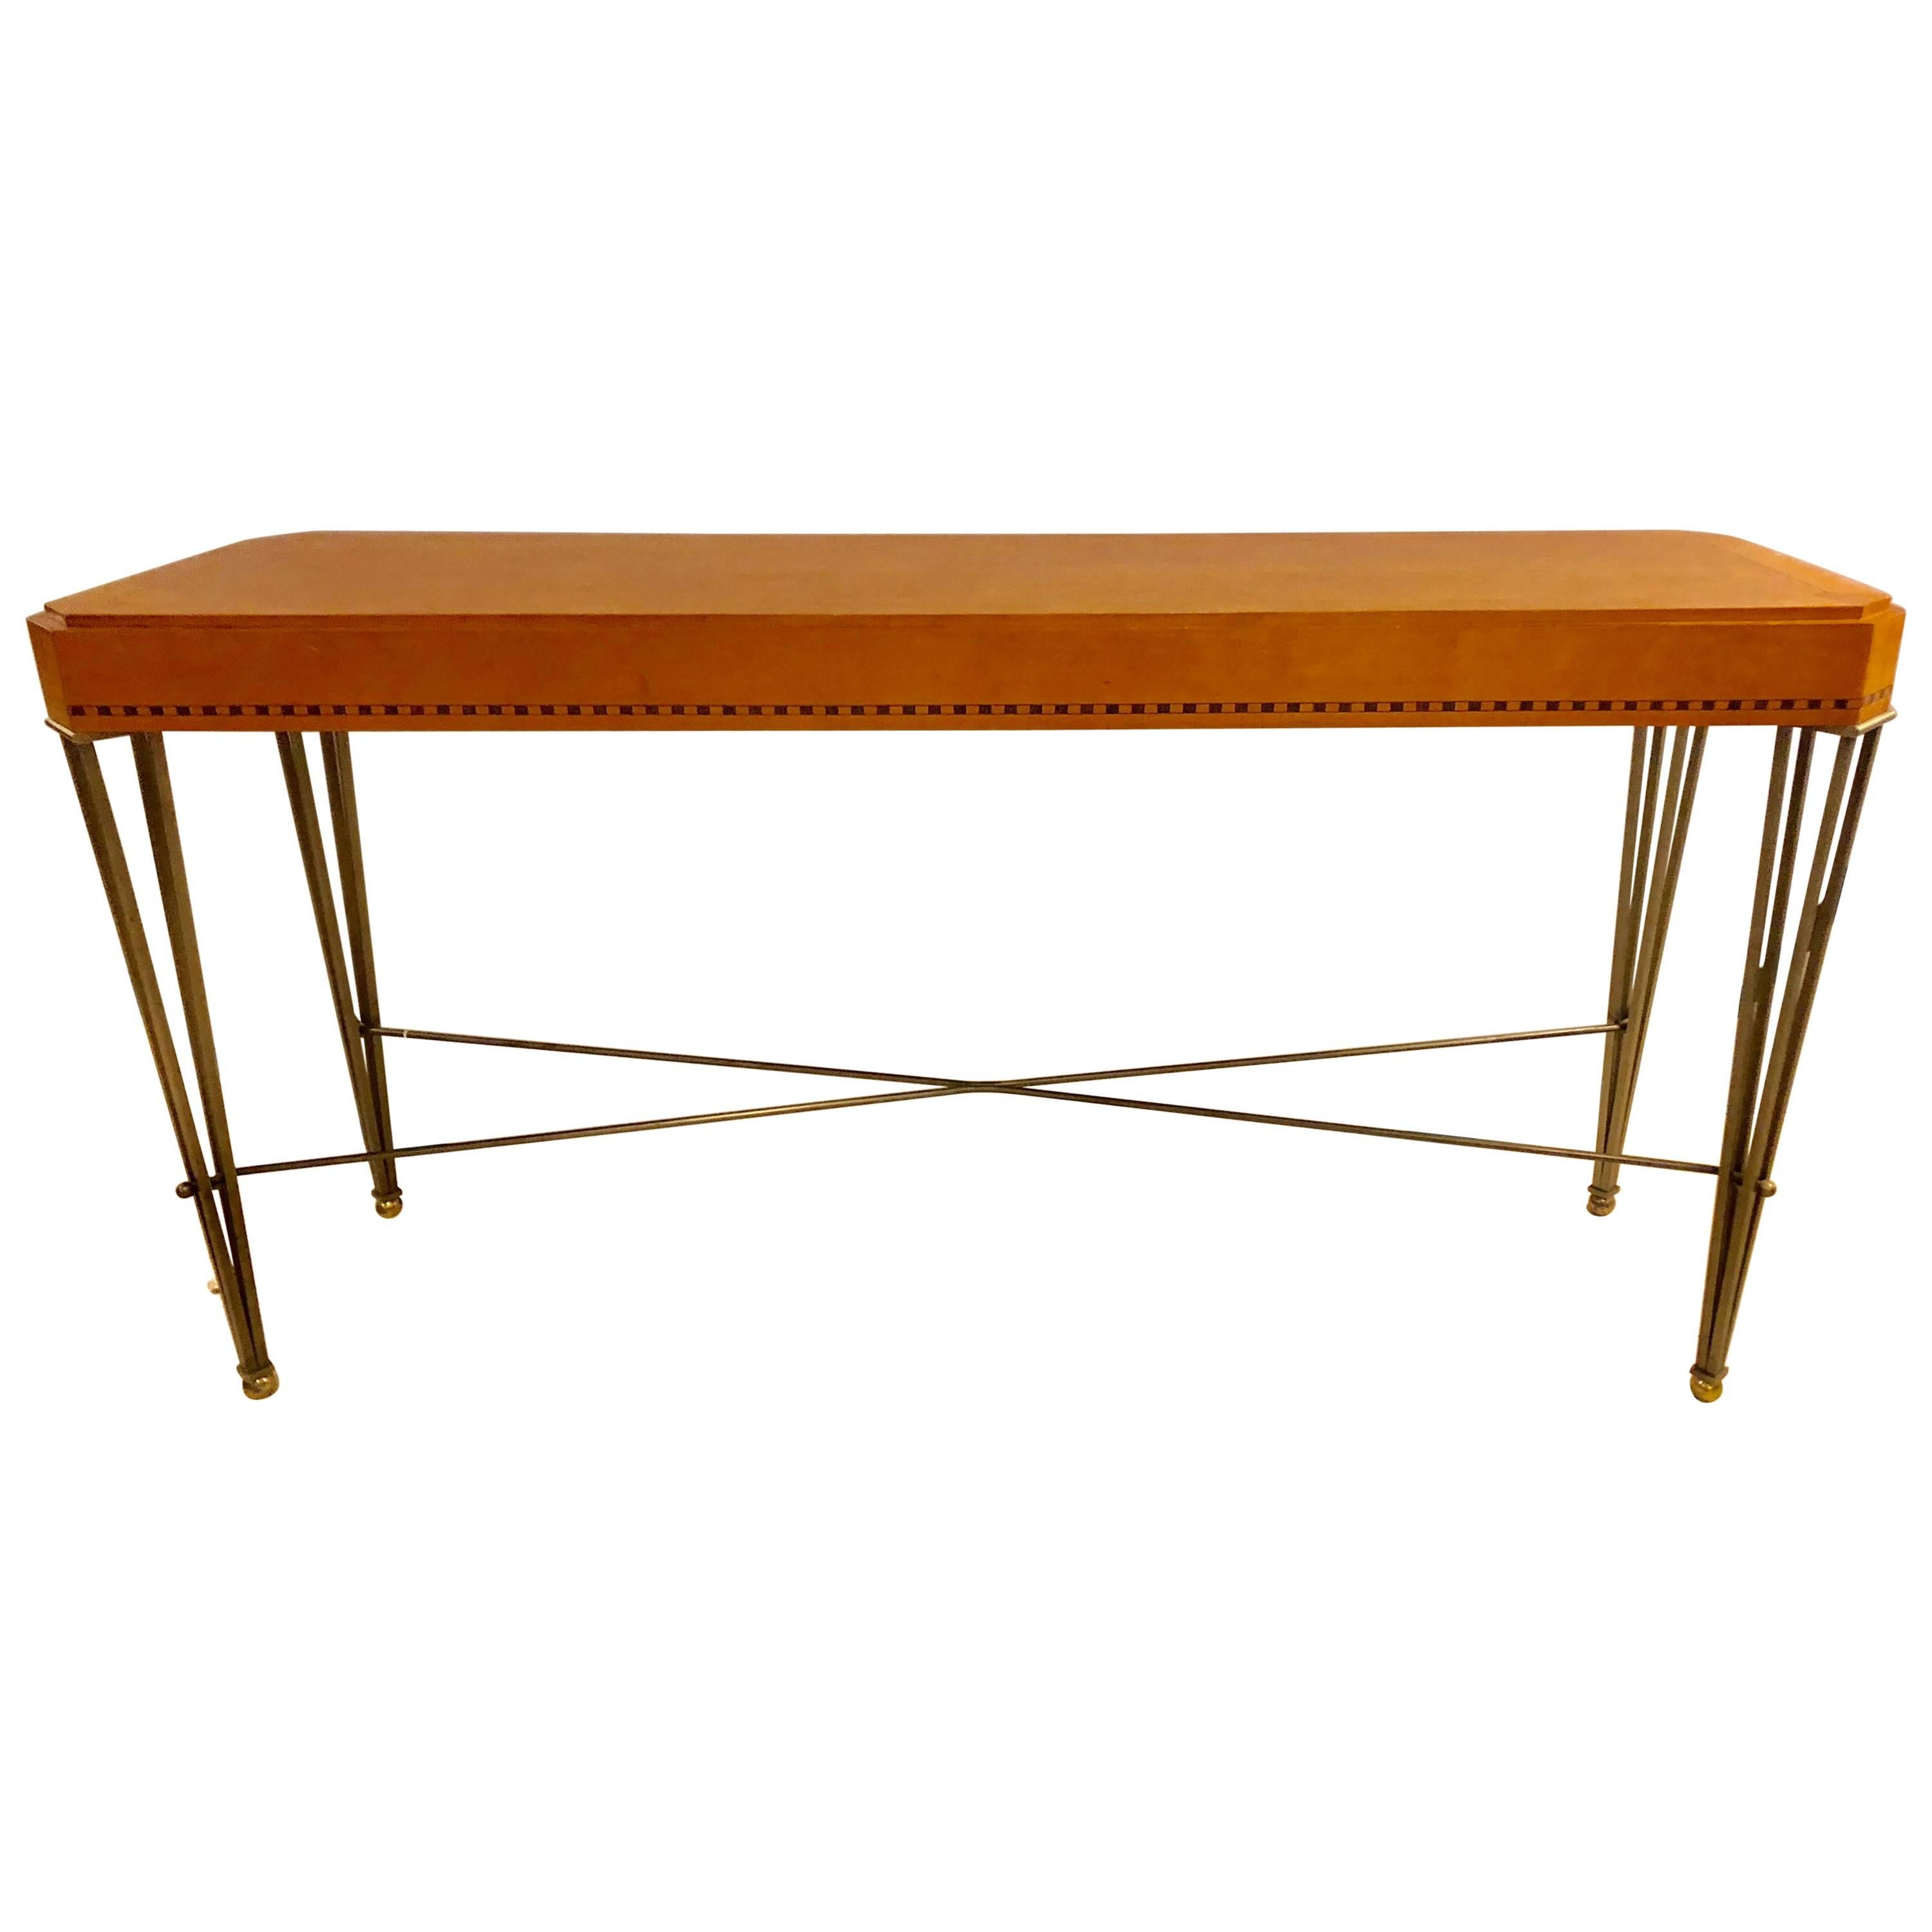 American Hollywood Regency Maple Console or Sofa Table with Wrought Iron Base